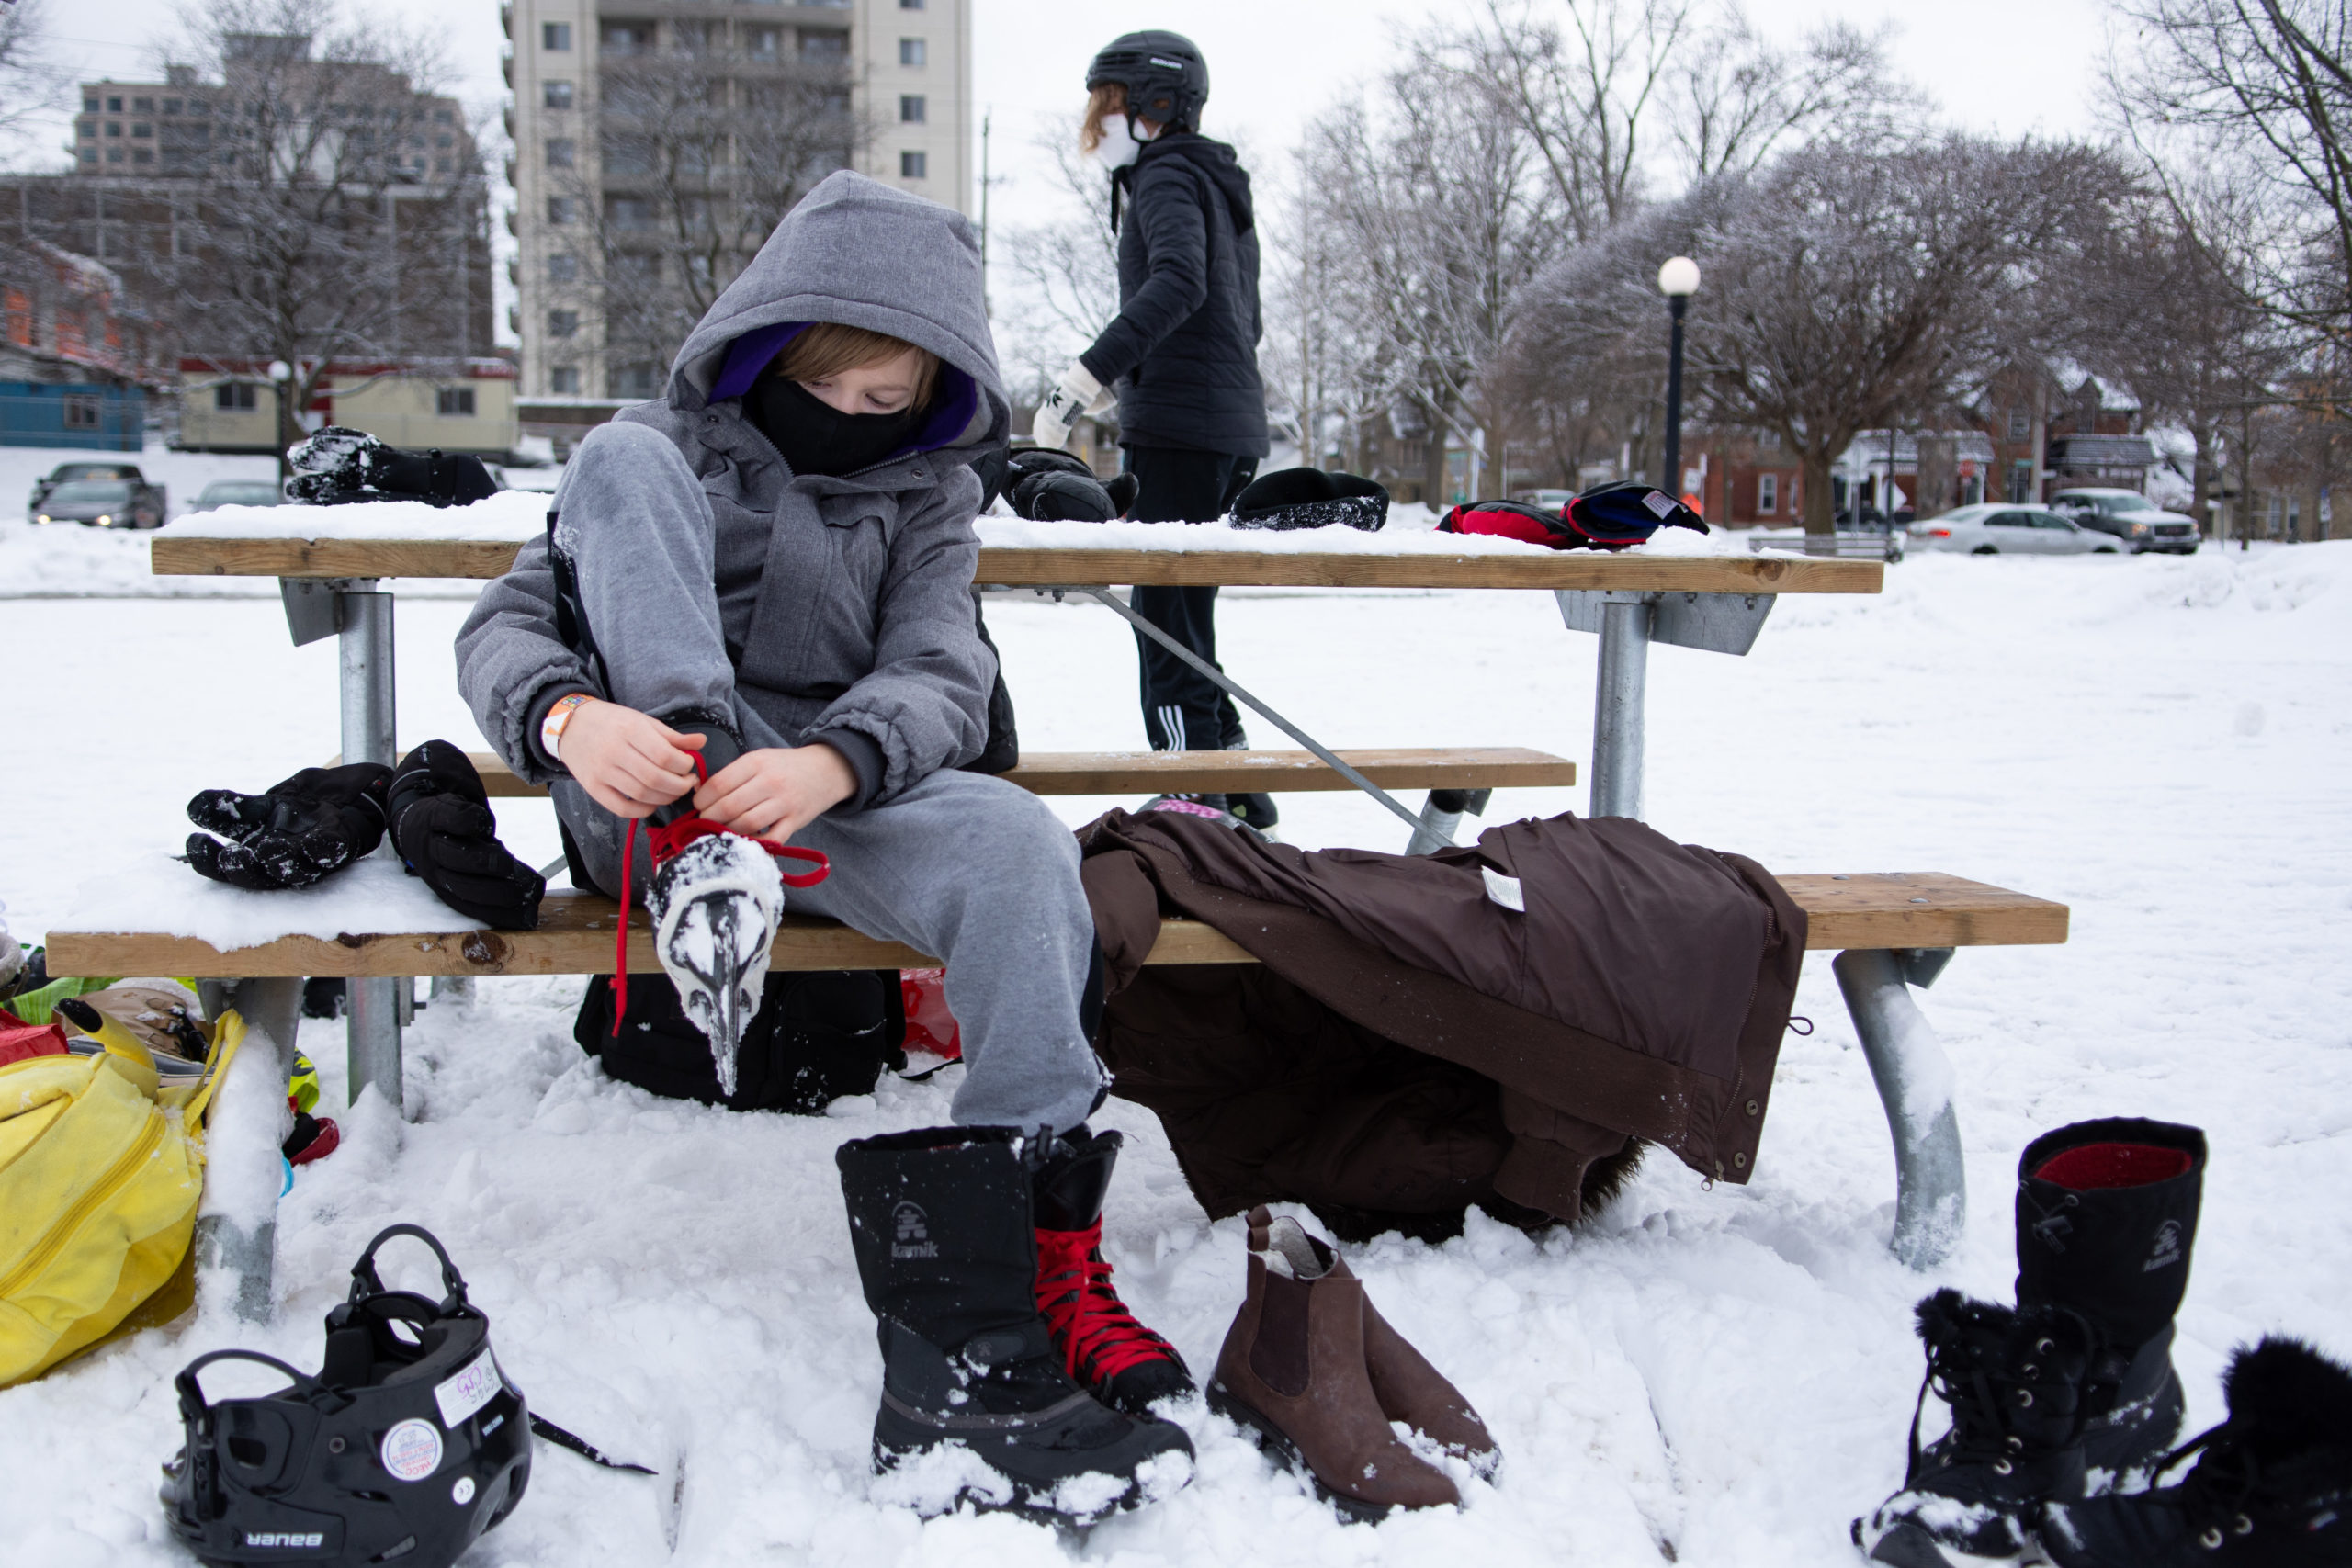 A student removes their skates while sitting on a park bench